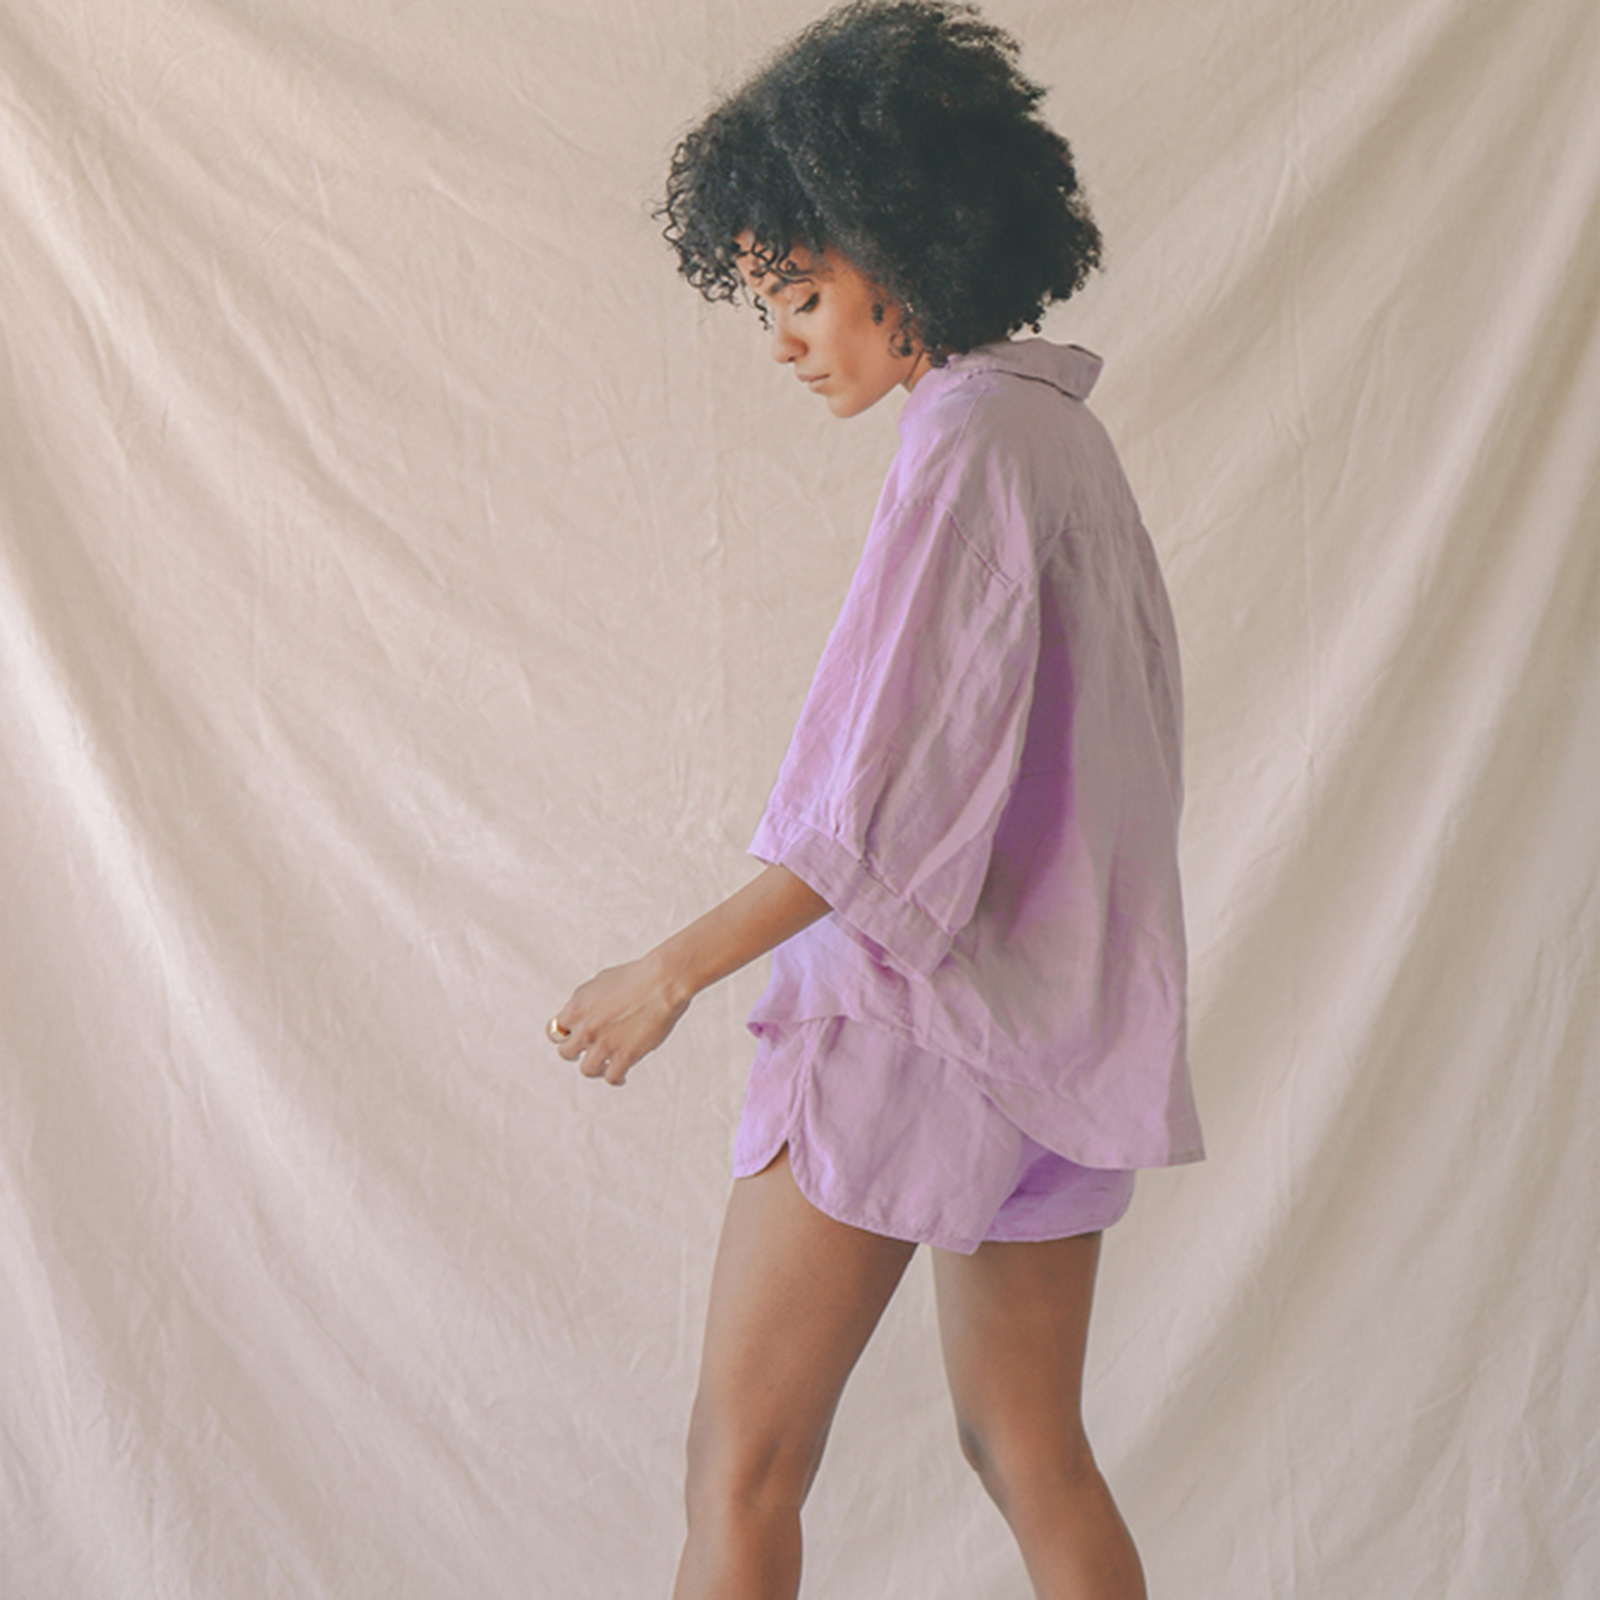 Ruby Shirt in Lilac